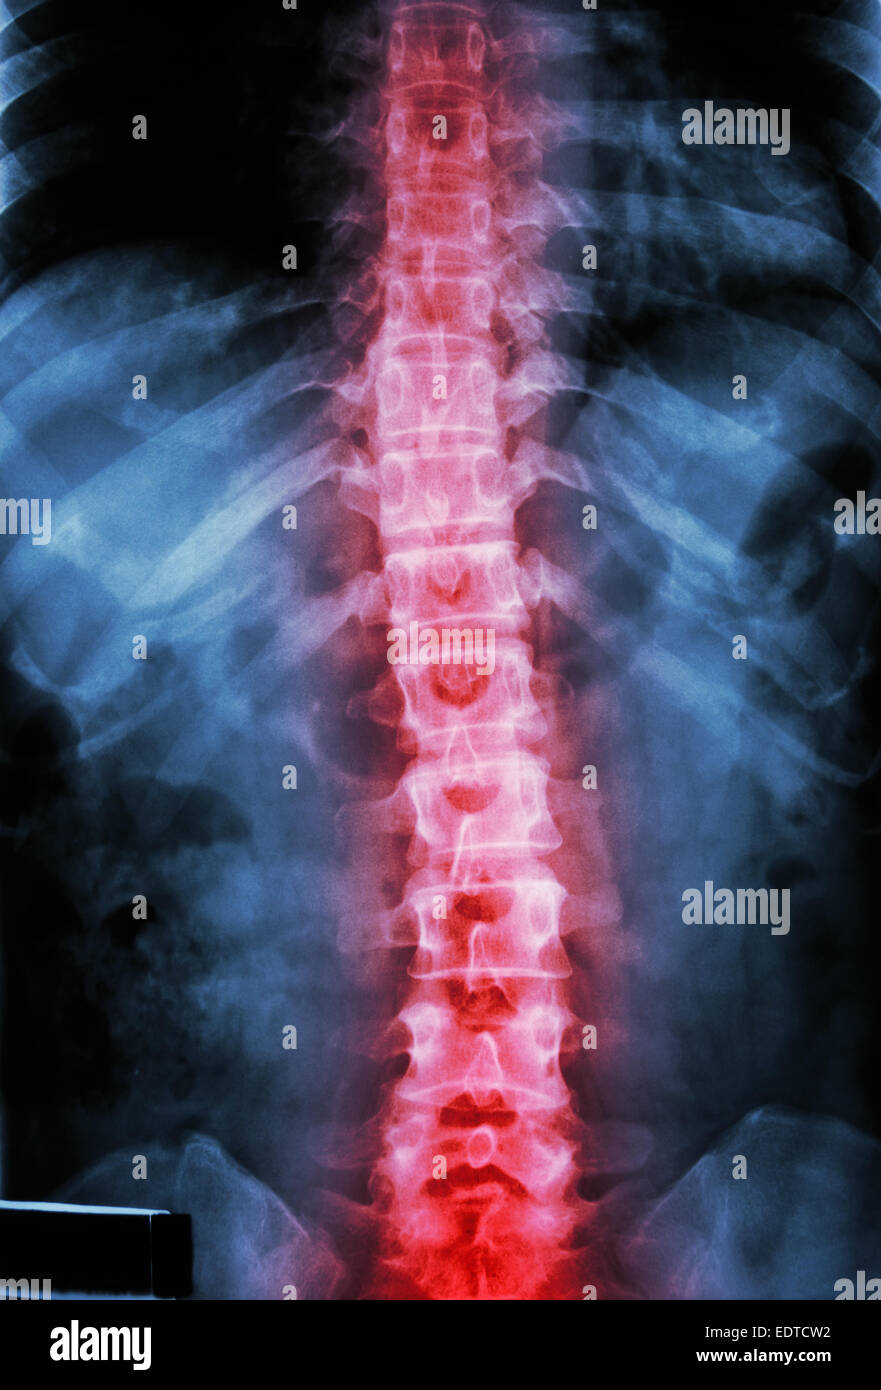 film x-ray T-L spine(Thoracic-Lumbar spine) show : human's thoracic-lumbar spine and inflammation at spine Stock Photo